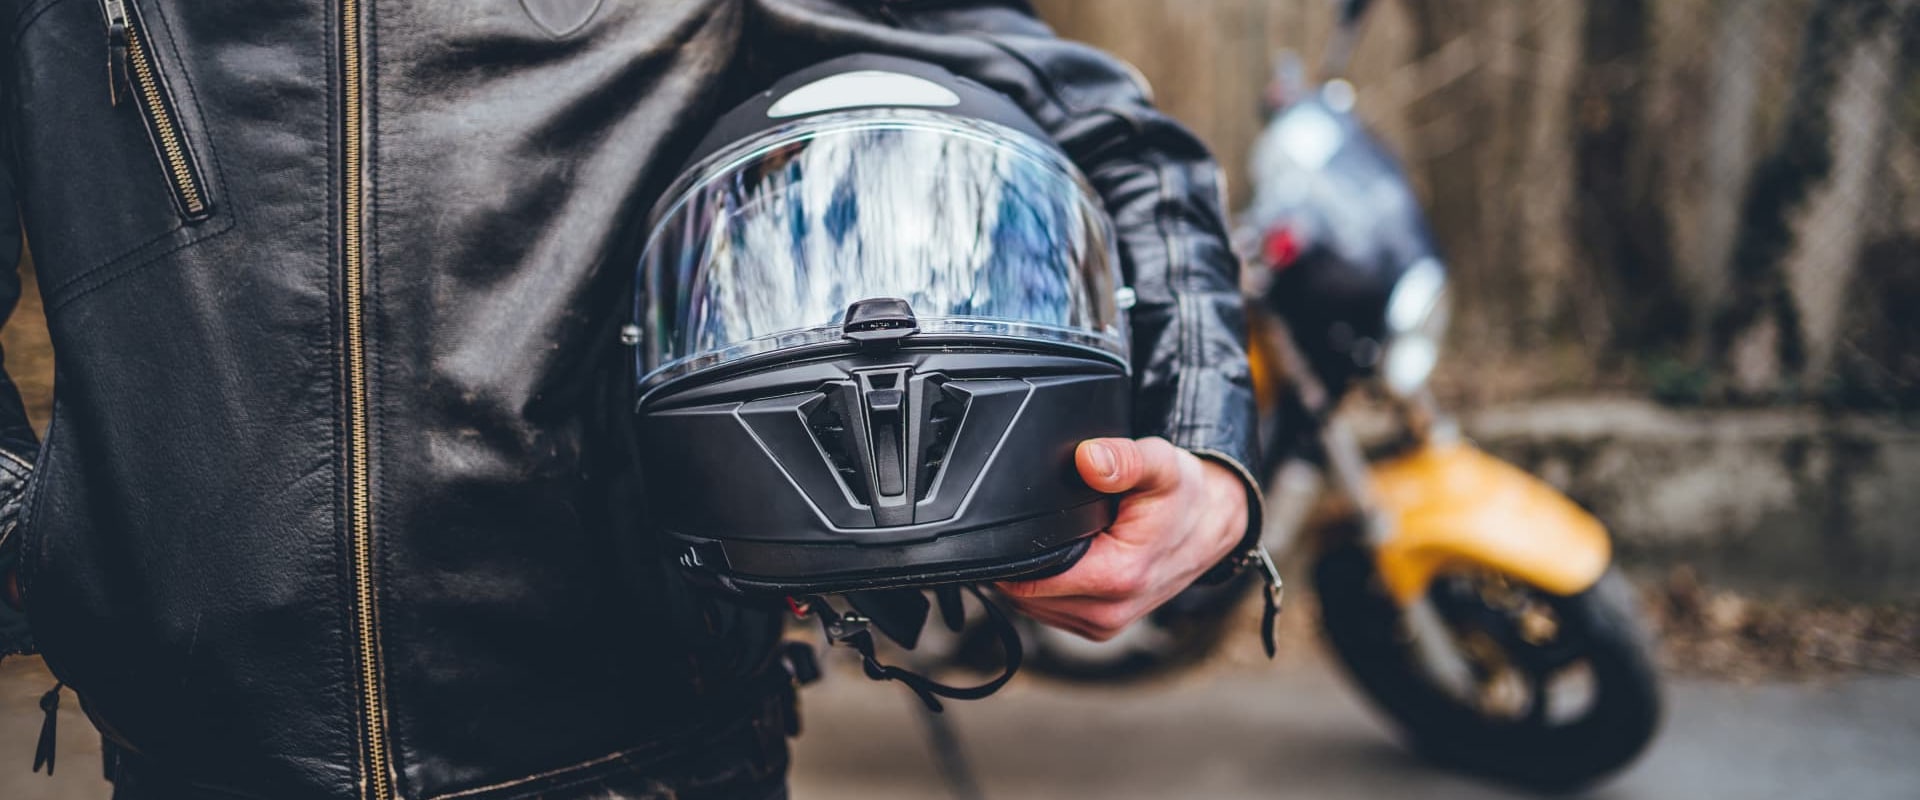 How to Incorporate Safety Gear Into Your Look: A Guide for Motorcycle Enthusiasts